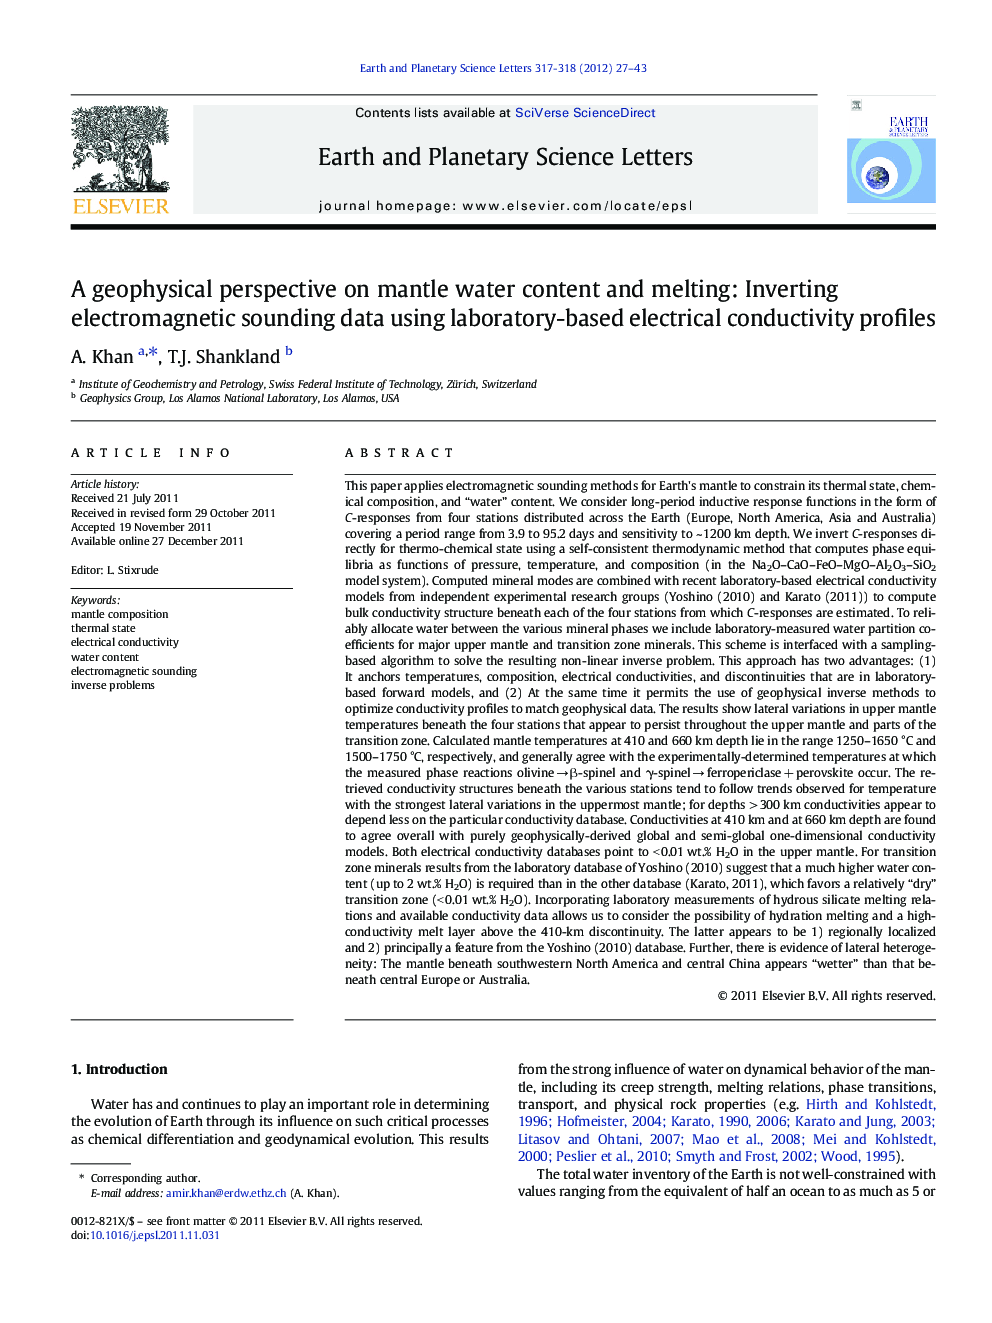 A geophysical perspective on mantle water content and melting: Inverting electromagnetic sounding data using laboratory-based electrical conductivity profiles